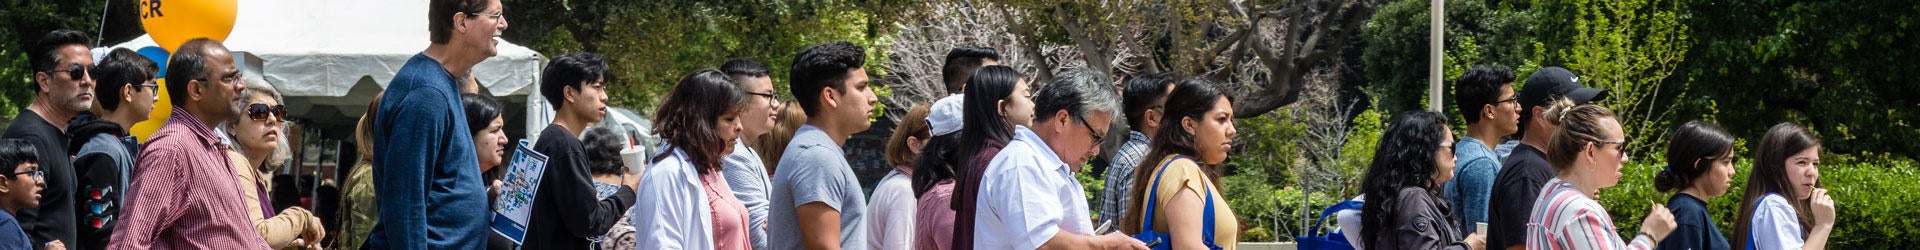 A large group of visitors is lead on a tour of the UCR campus